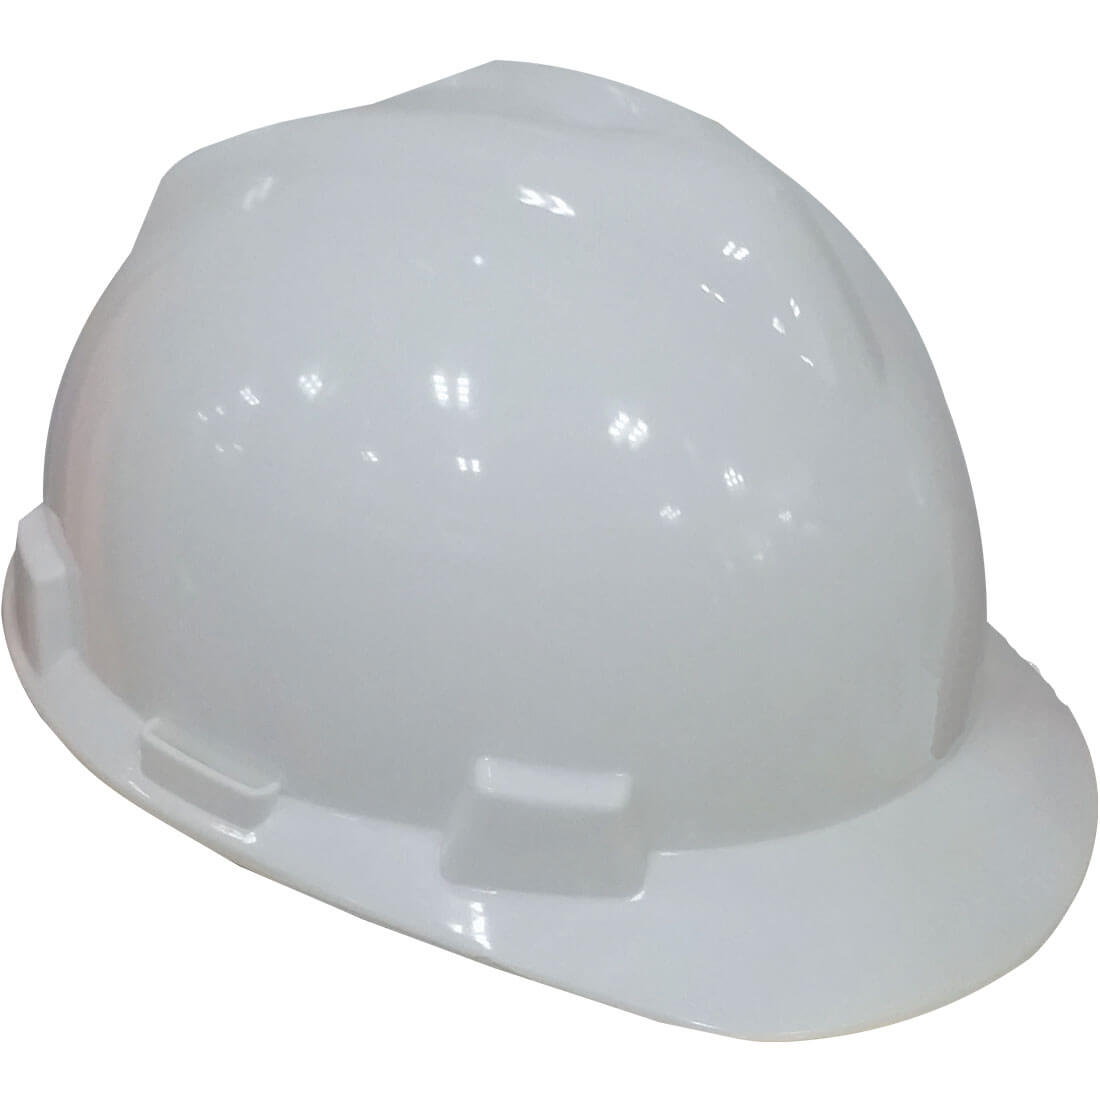 DF Safety Helmet - Personal protection